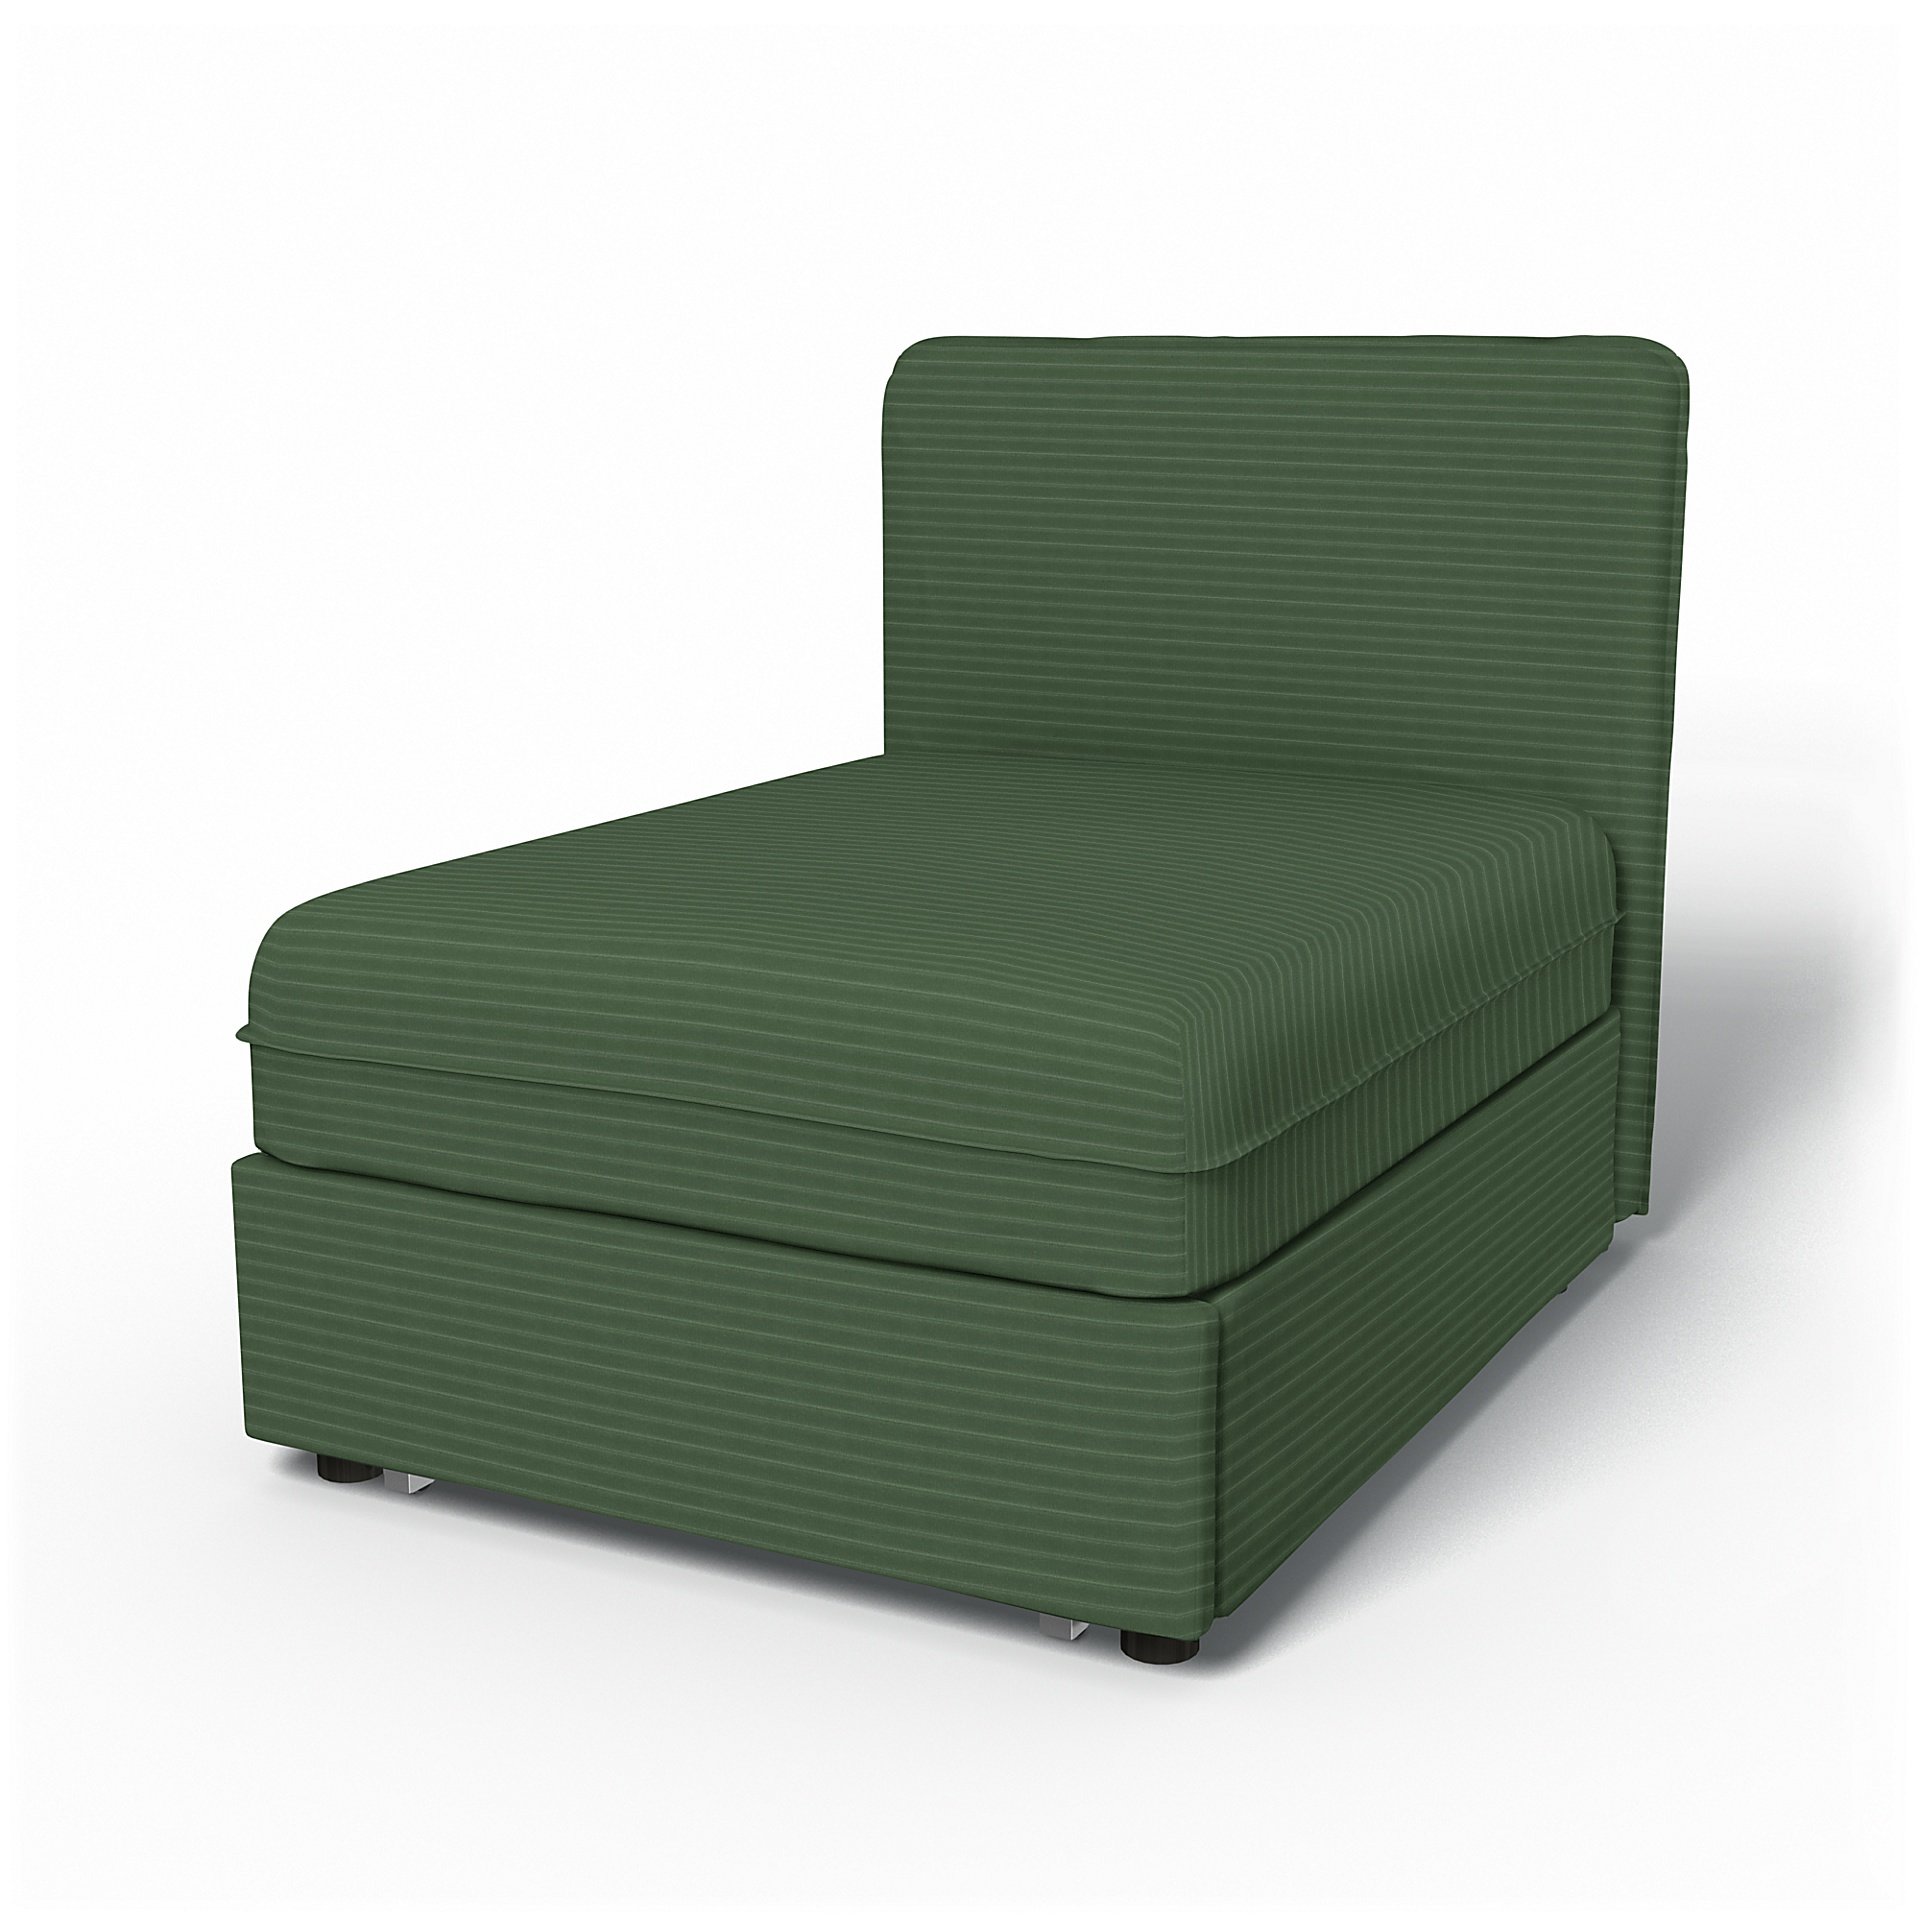 IKEA - Vallentuna Seat Module with Low Back Sofa Bed Cover 80x100 cm 32x39in, Palm Green, Corduroy -